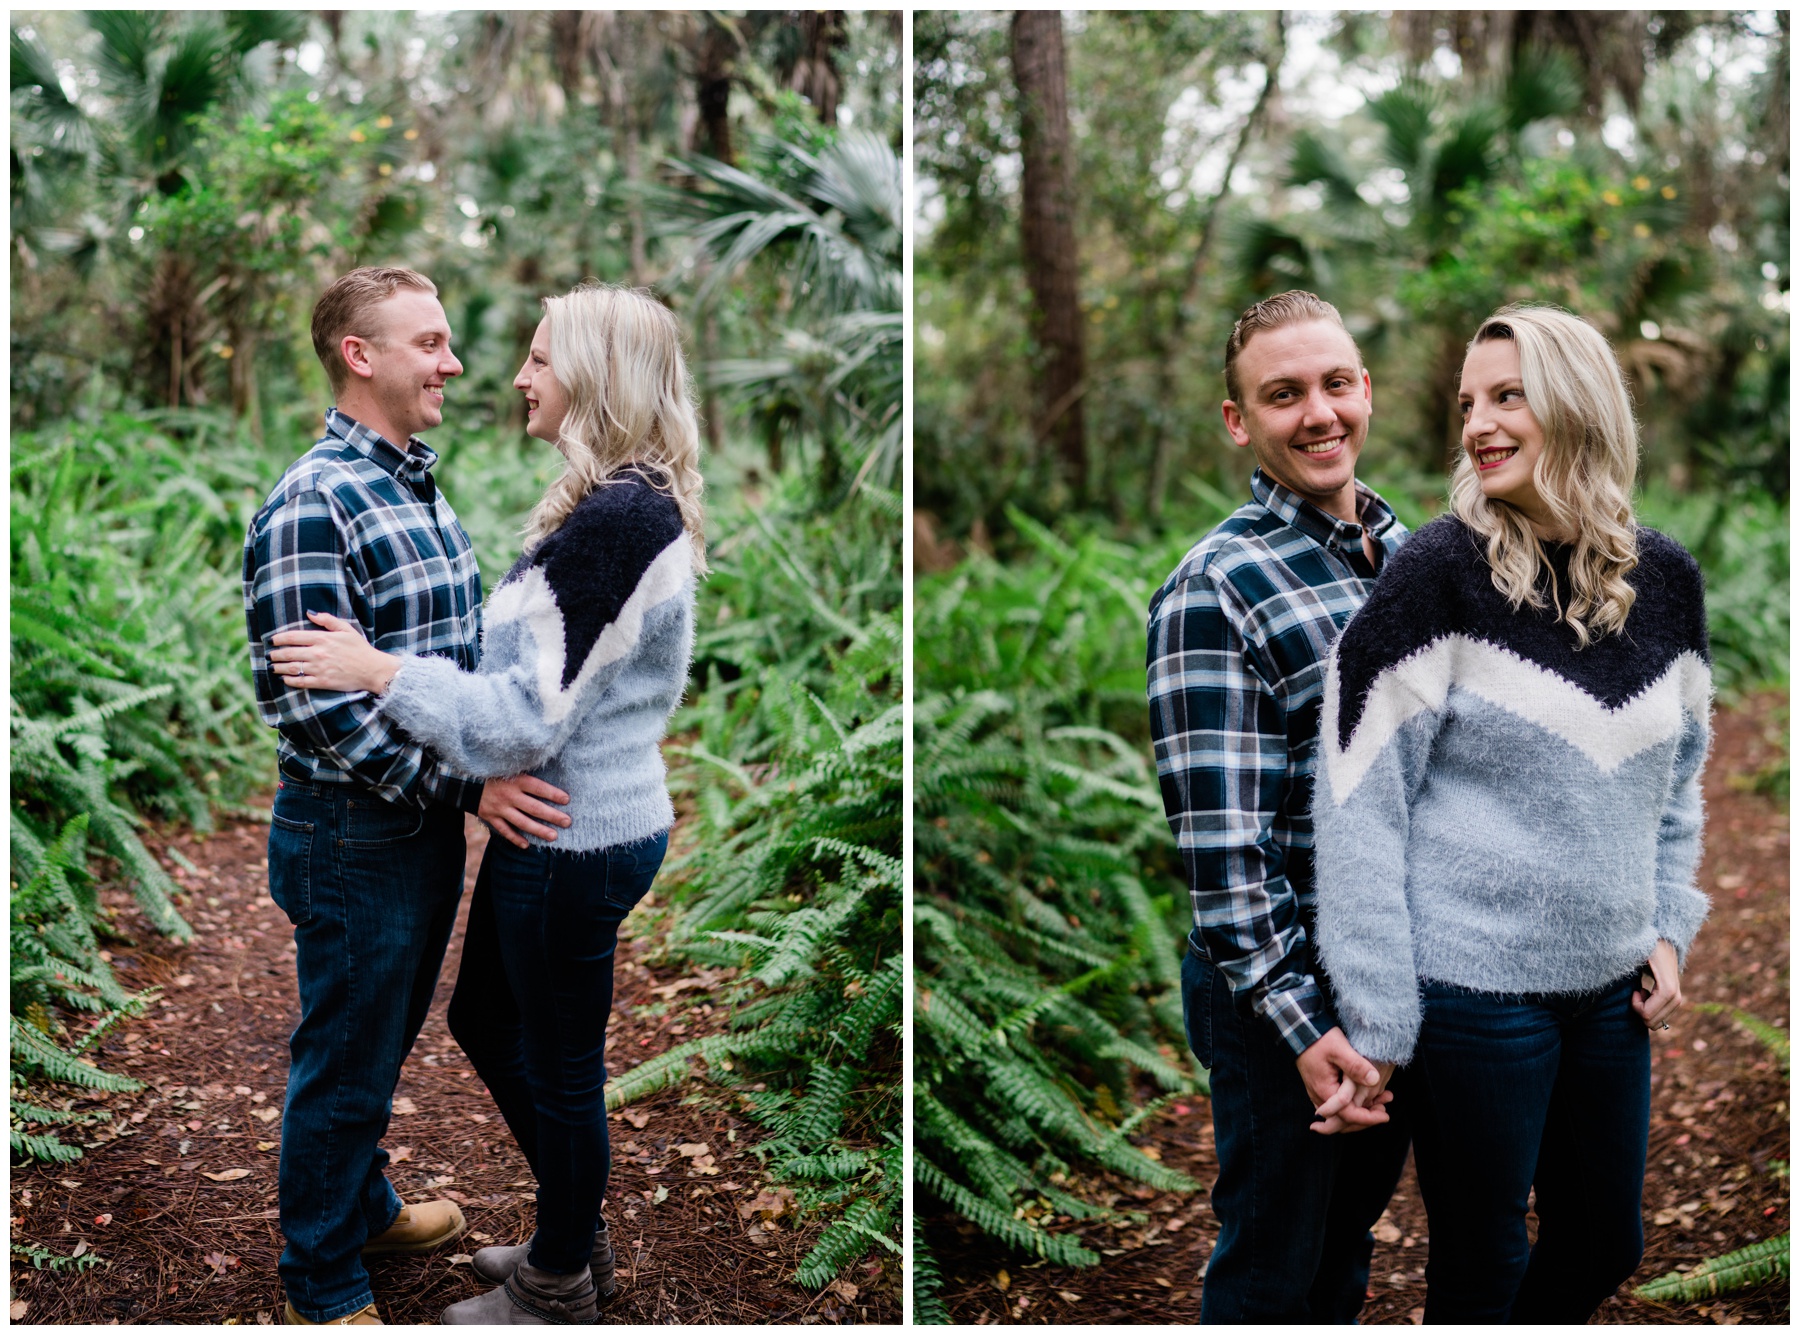 Couple embraces in swamp setting during Fort Myers photoshoot.